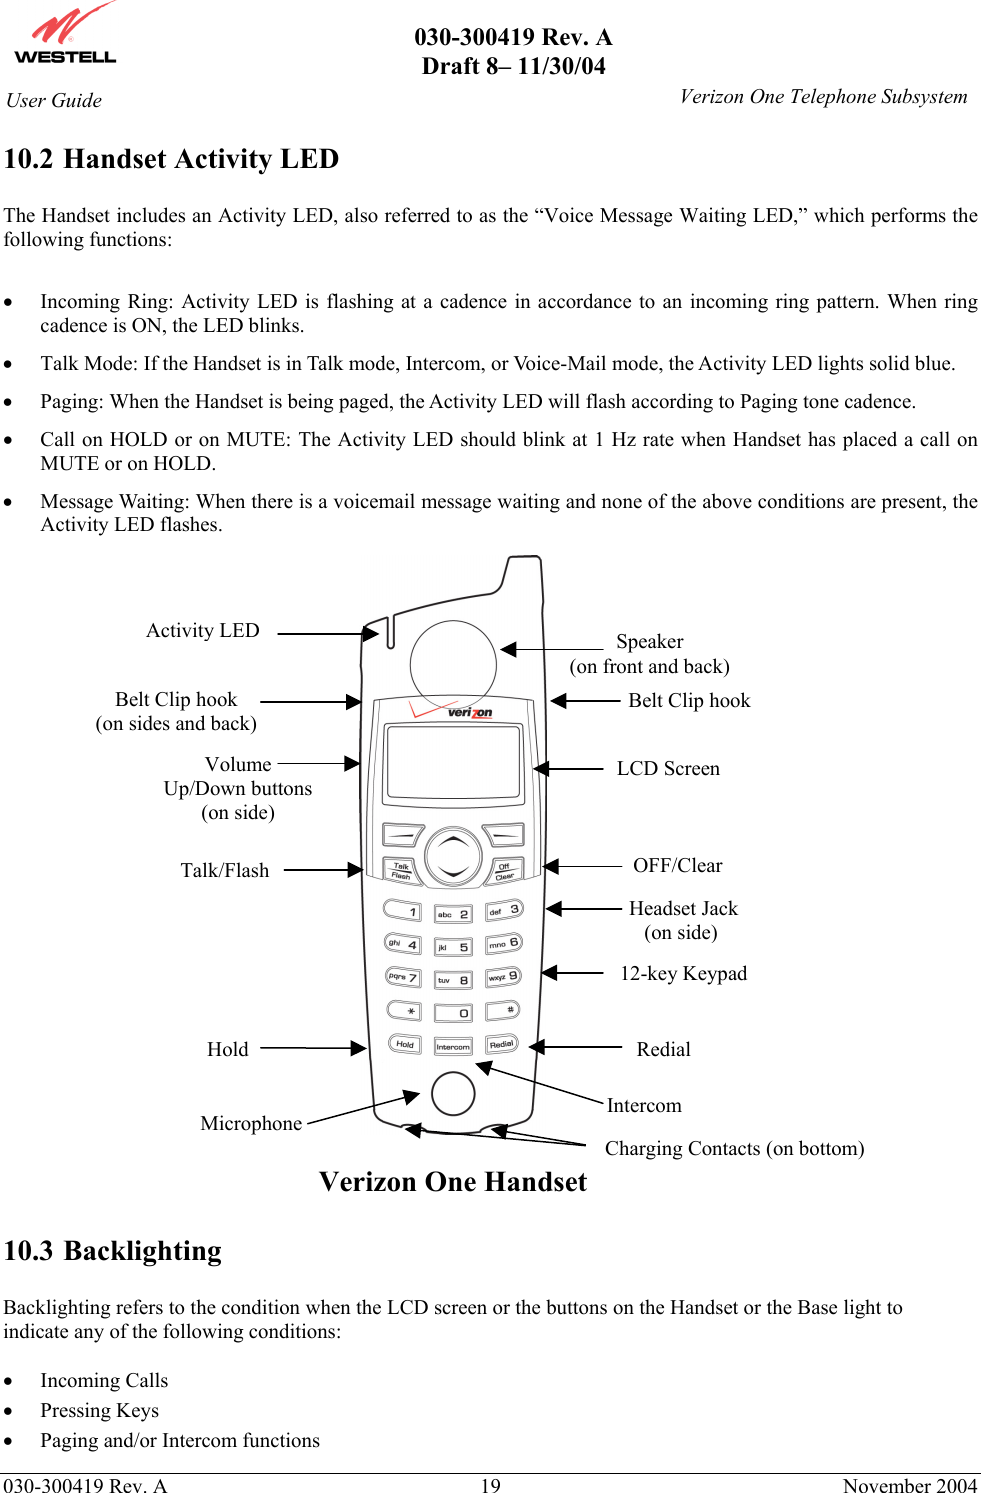       030-300419 Rev. A Draft 8– 11/30/04    030-300419 Rev. A  19  November 2004 User Guide   Verizon One Telephone Subsystem10.2 Handset Activity LED  The Handset includes an Activity LED, also referred to as the “Voice Message Waiting LED,” which performs the following functions:  •  Incoming Ring: Activity LED is flashing at a cadence in accordance to an incoming ring pattern. When ring cadence is ON, the LED blinks. •  Talk Mode: If the Handset is in Talk mode, Intercom, or Voice-Mail mode, the Activity LED lights solid blue. •  Paging: When the Handset is being paged, the Activity LED will flash according to Paging tone cadence. •  Call on HOLD or on MUTE: The Activity LED should blink at 1 Hz rate when Handset has placed a call on MUTE or on HOLD. •  Message Waiting: When there is a voicemail message waiting and none of the above conditions are present, the Activity LED flashes.     Verizon One Handset  10.3 Backlighting  Backlighting refers to the condition when the LCD screen or the buttons on the Handset or the Base light to indicate any of the following conditions:  •  Incoming Calls •  Pressing Keys •  Paging and/or Intercom functions Activity LED Talk/Flash  OFF/ClearHold IntercomRedialLCD Screen12-key Keypad Microphone Speaker (on front and back)Volume Up/Down buttons (on side)  Headset Jack(on side)Belt Clip hook (on sides and back) Belt Clip hook Charging Contacts (on bottom) 